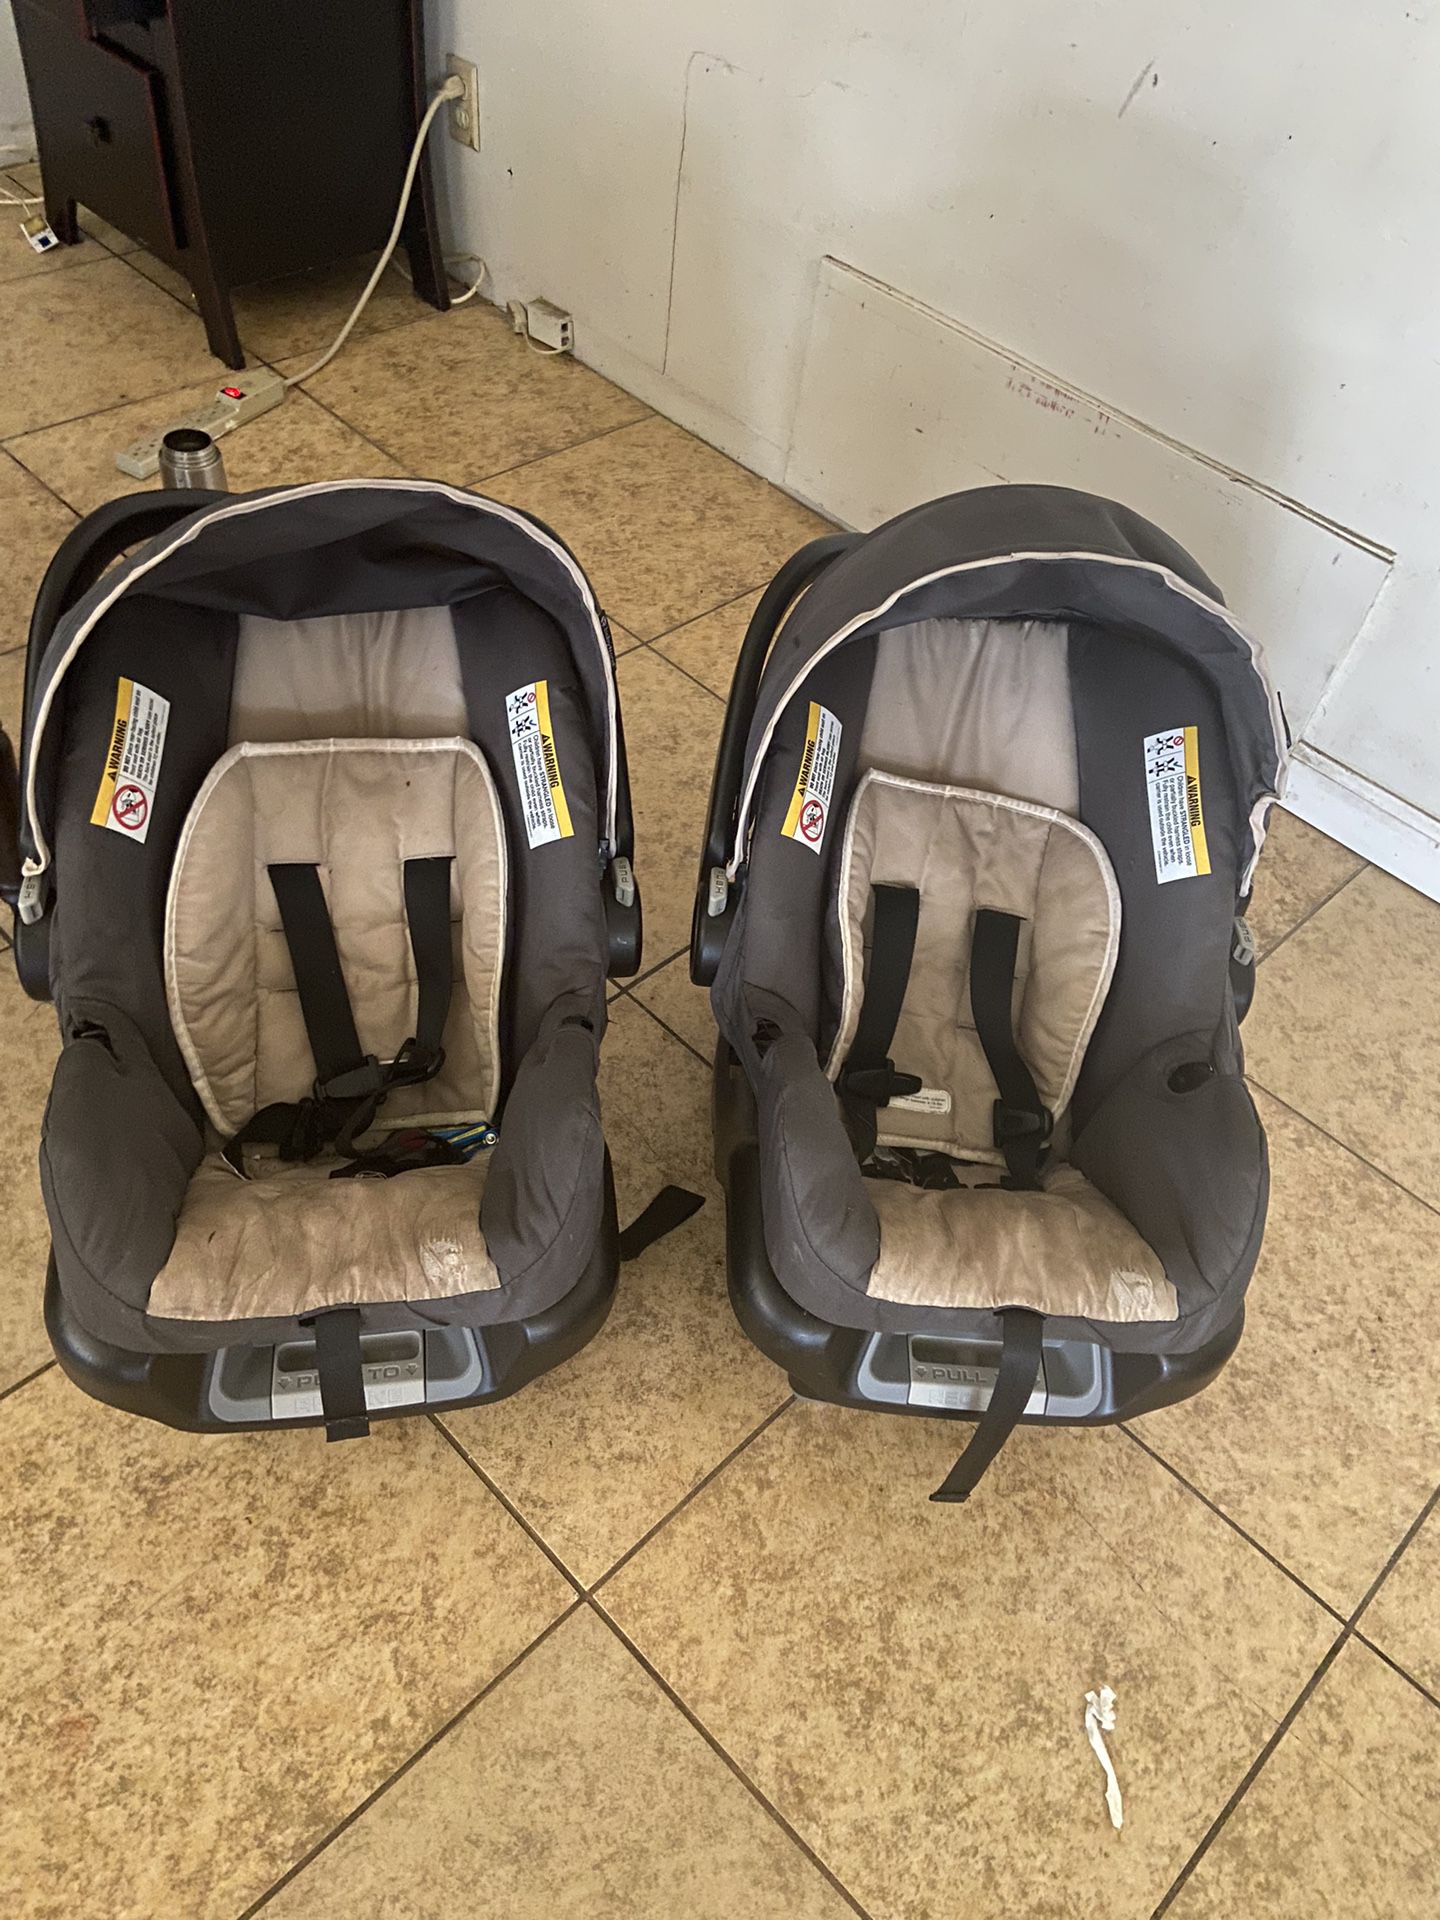 Double Stroller And Two Car Seats With Bases